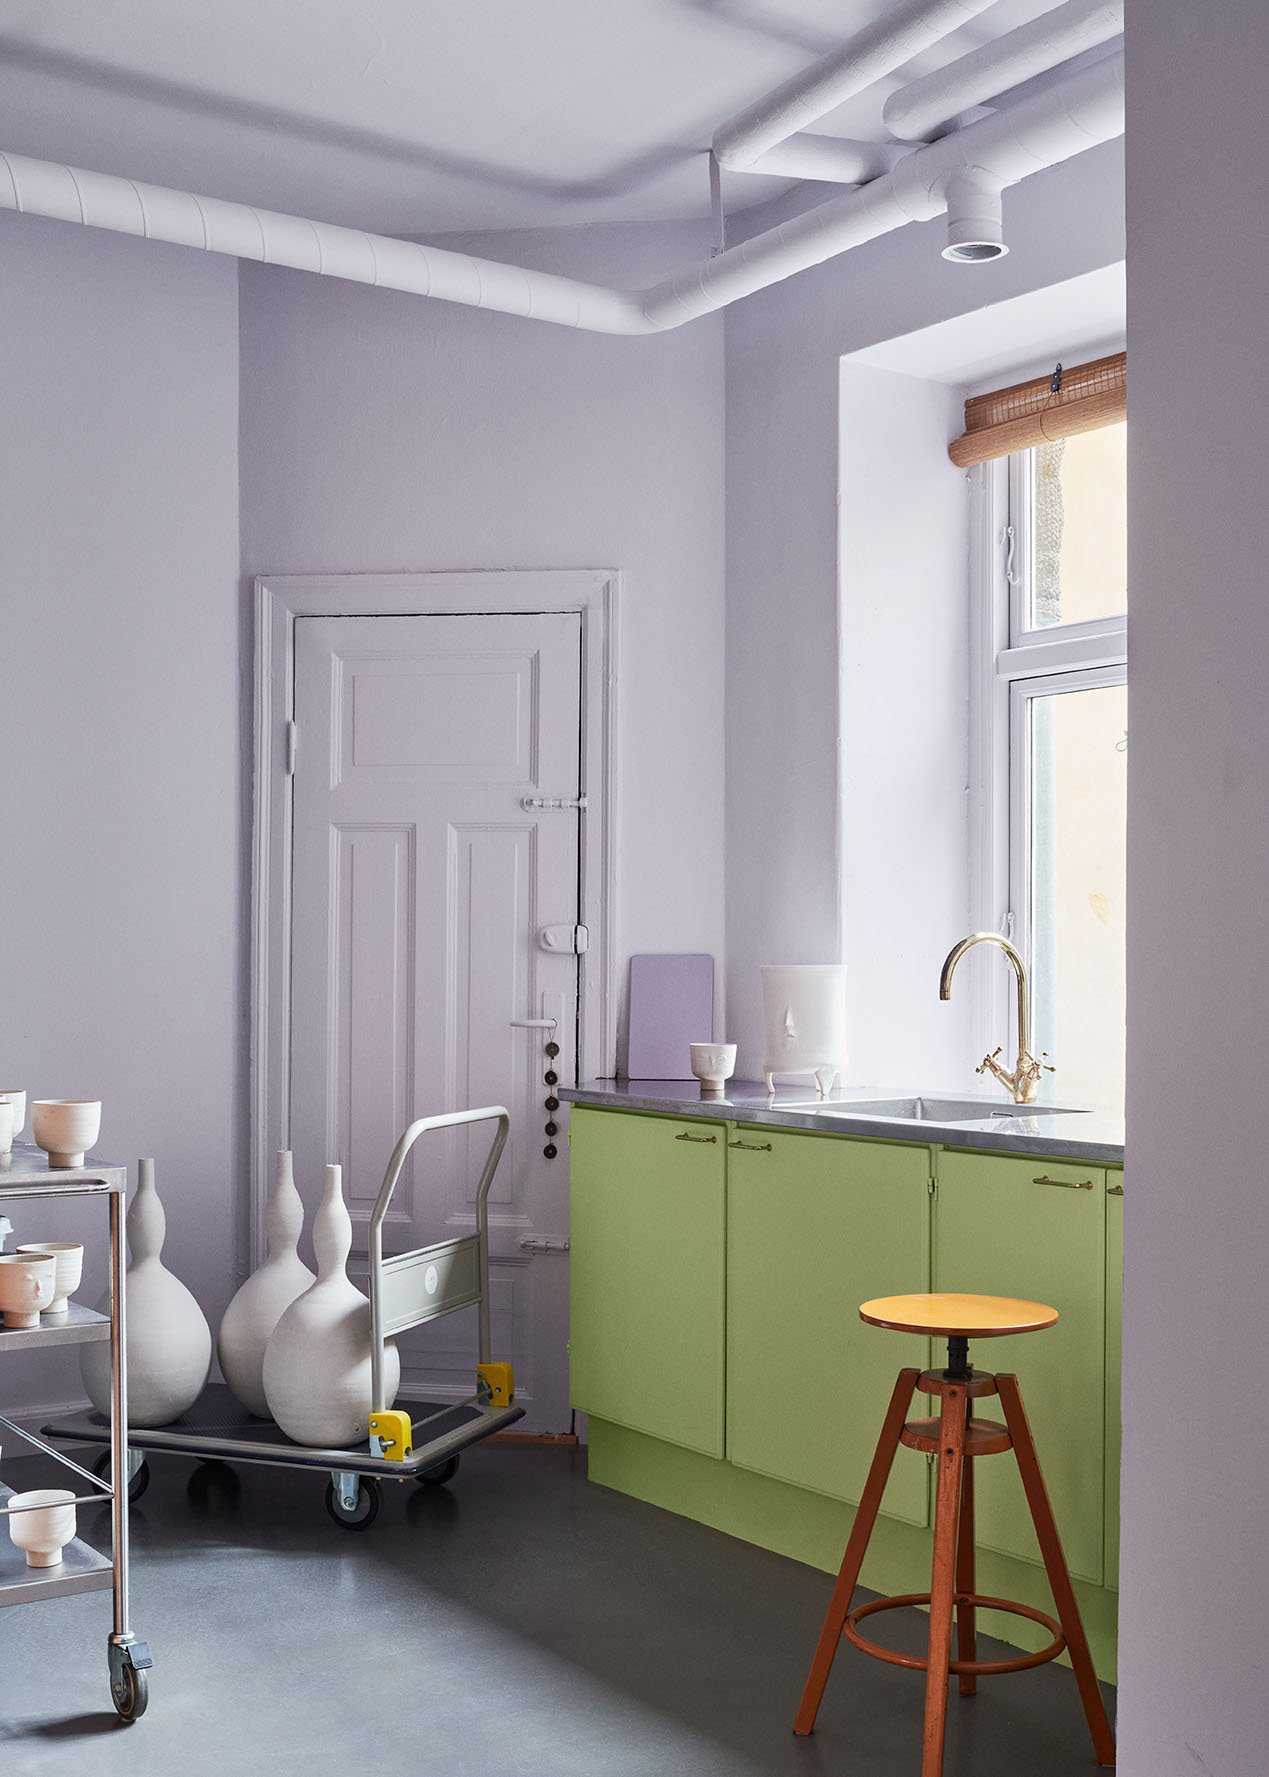 Walls painted with ‘Violet Hair’